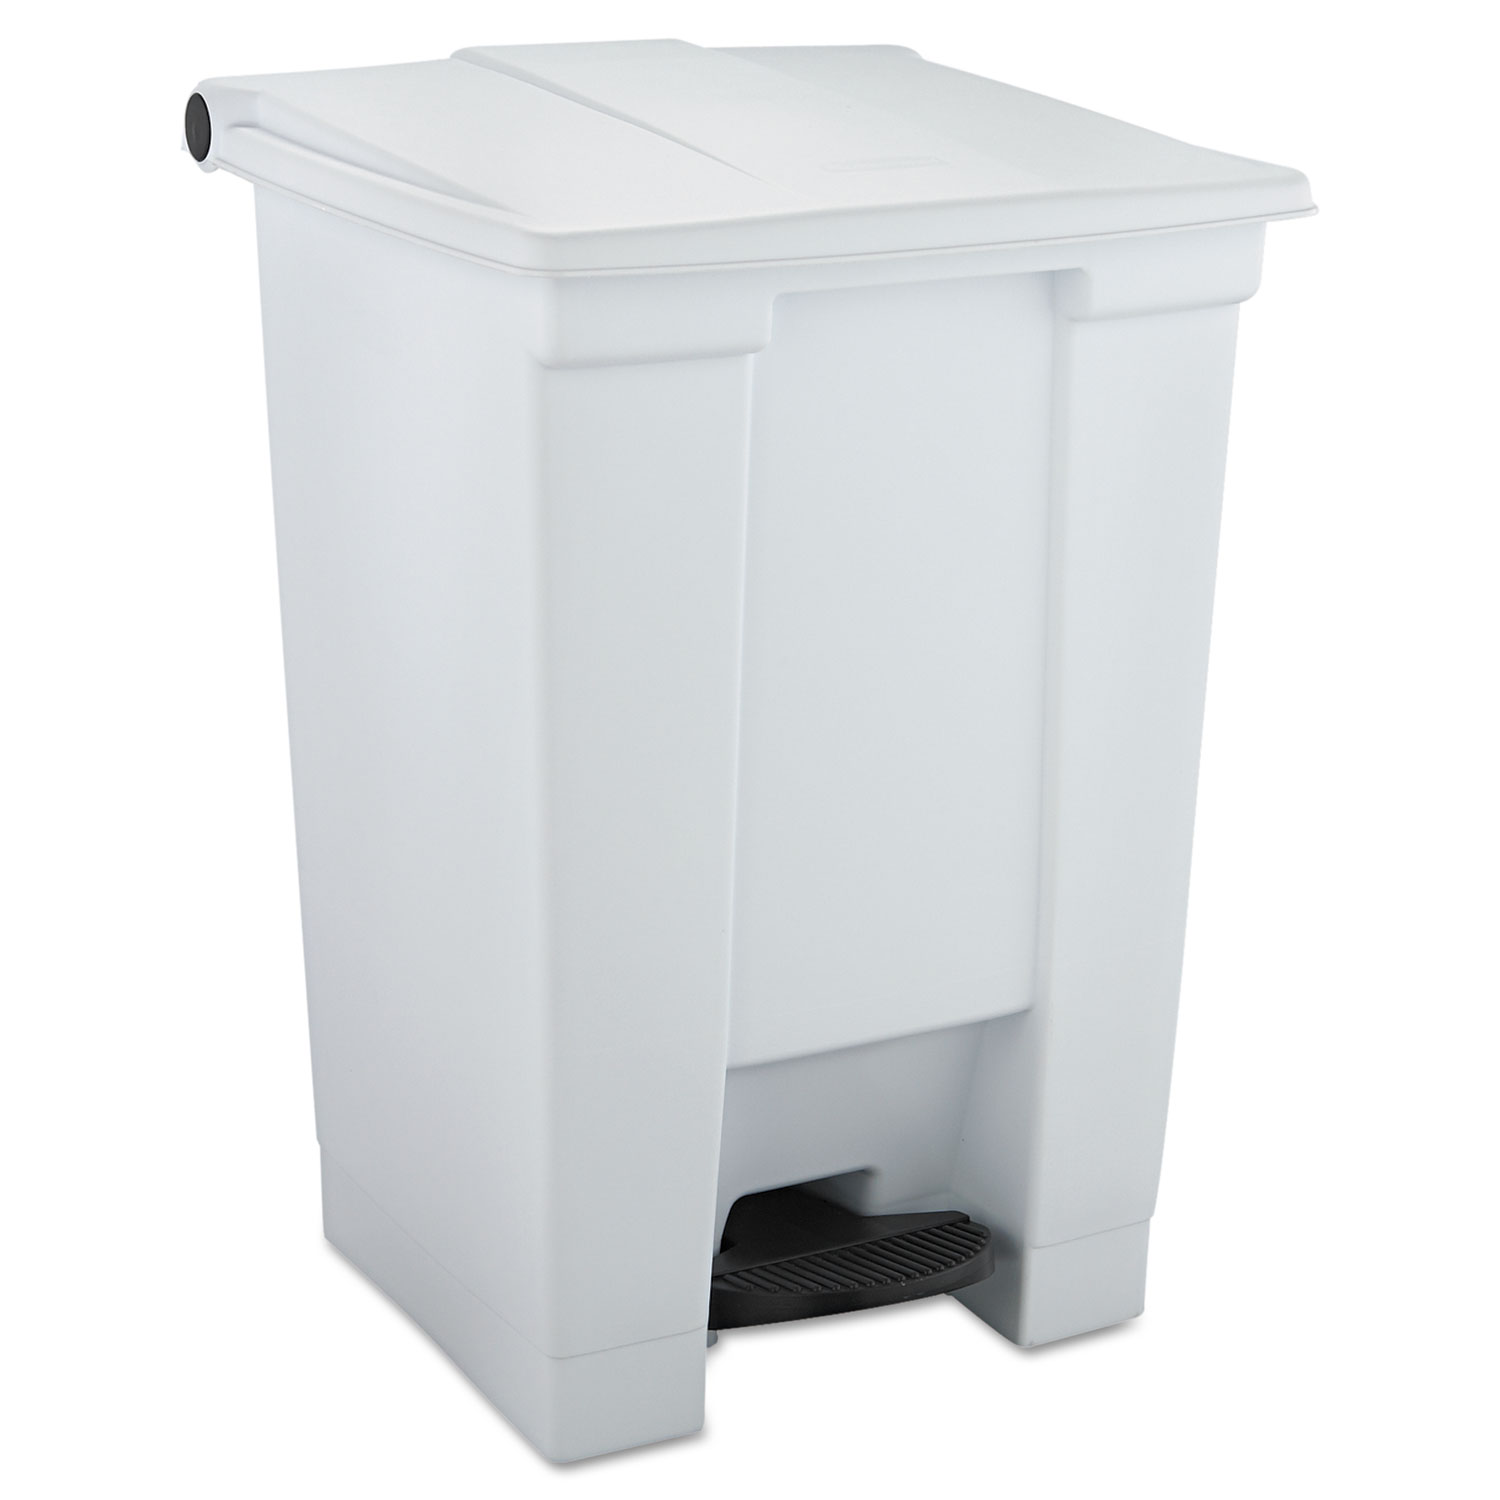  Rubbermaid Commercial FG614400WHT Indoor Utility Step-On Waste Container, Square, Plastic, 12 gal, White (RCP6144WHI) 